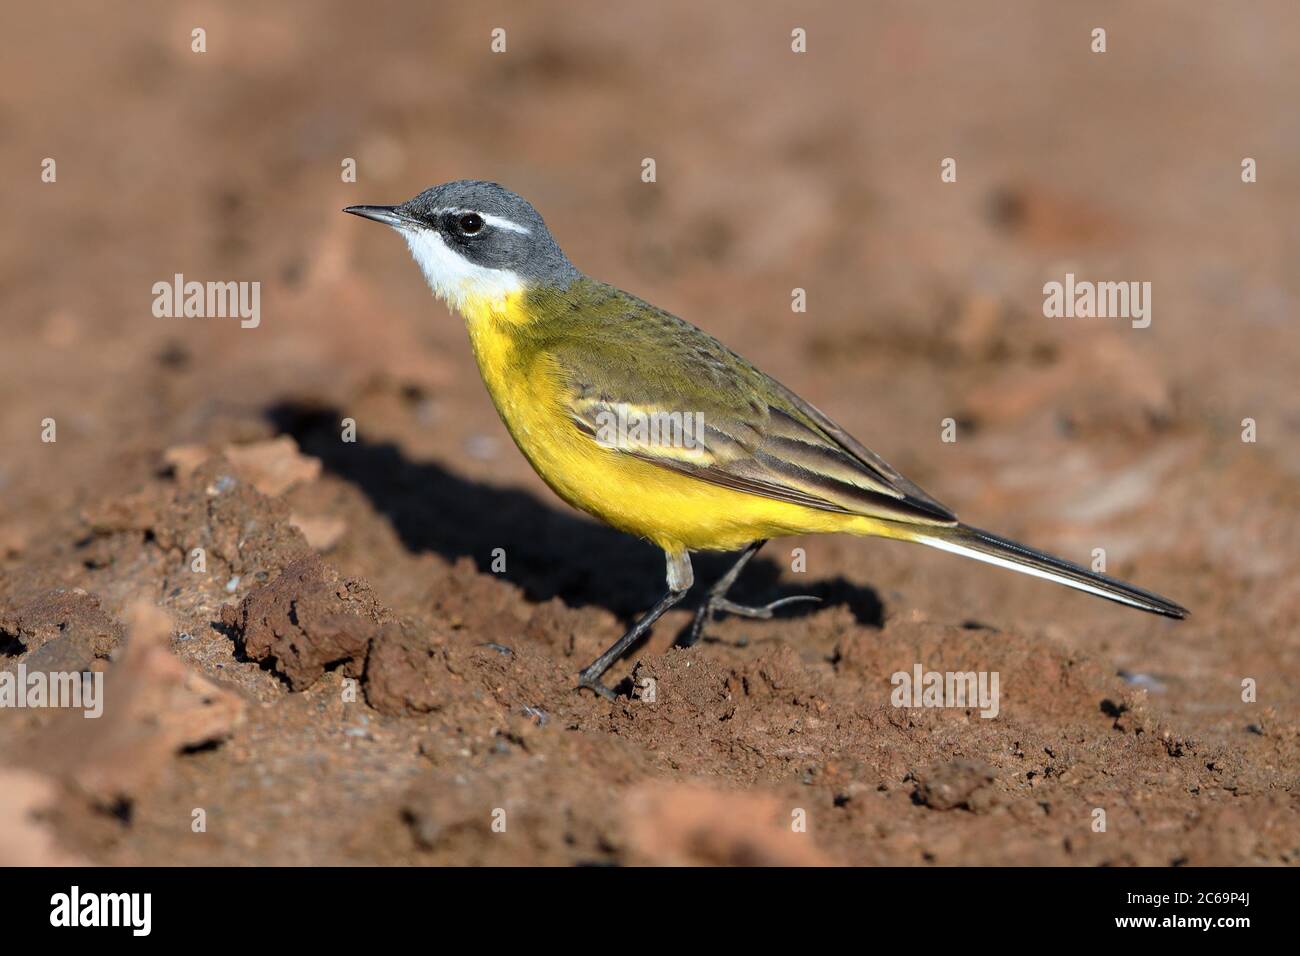 Male Spanish Yellow Wagtail (Motacilla flava iberiae) walking on the ground at Hyeres in France. Stock Photo